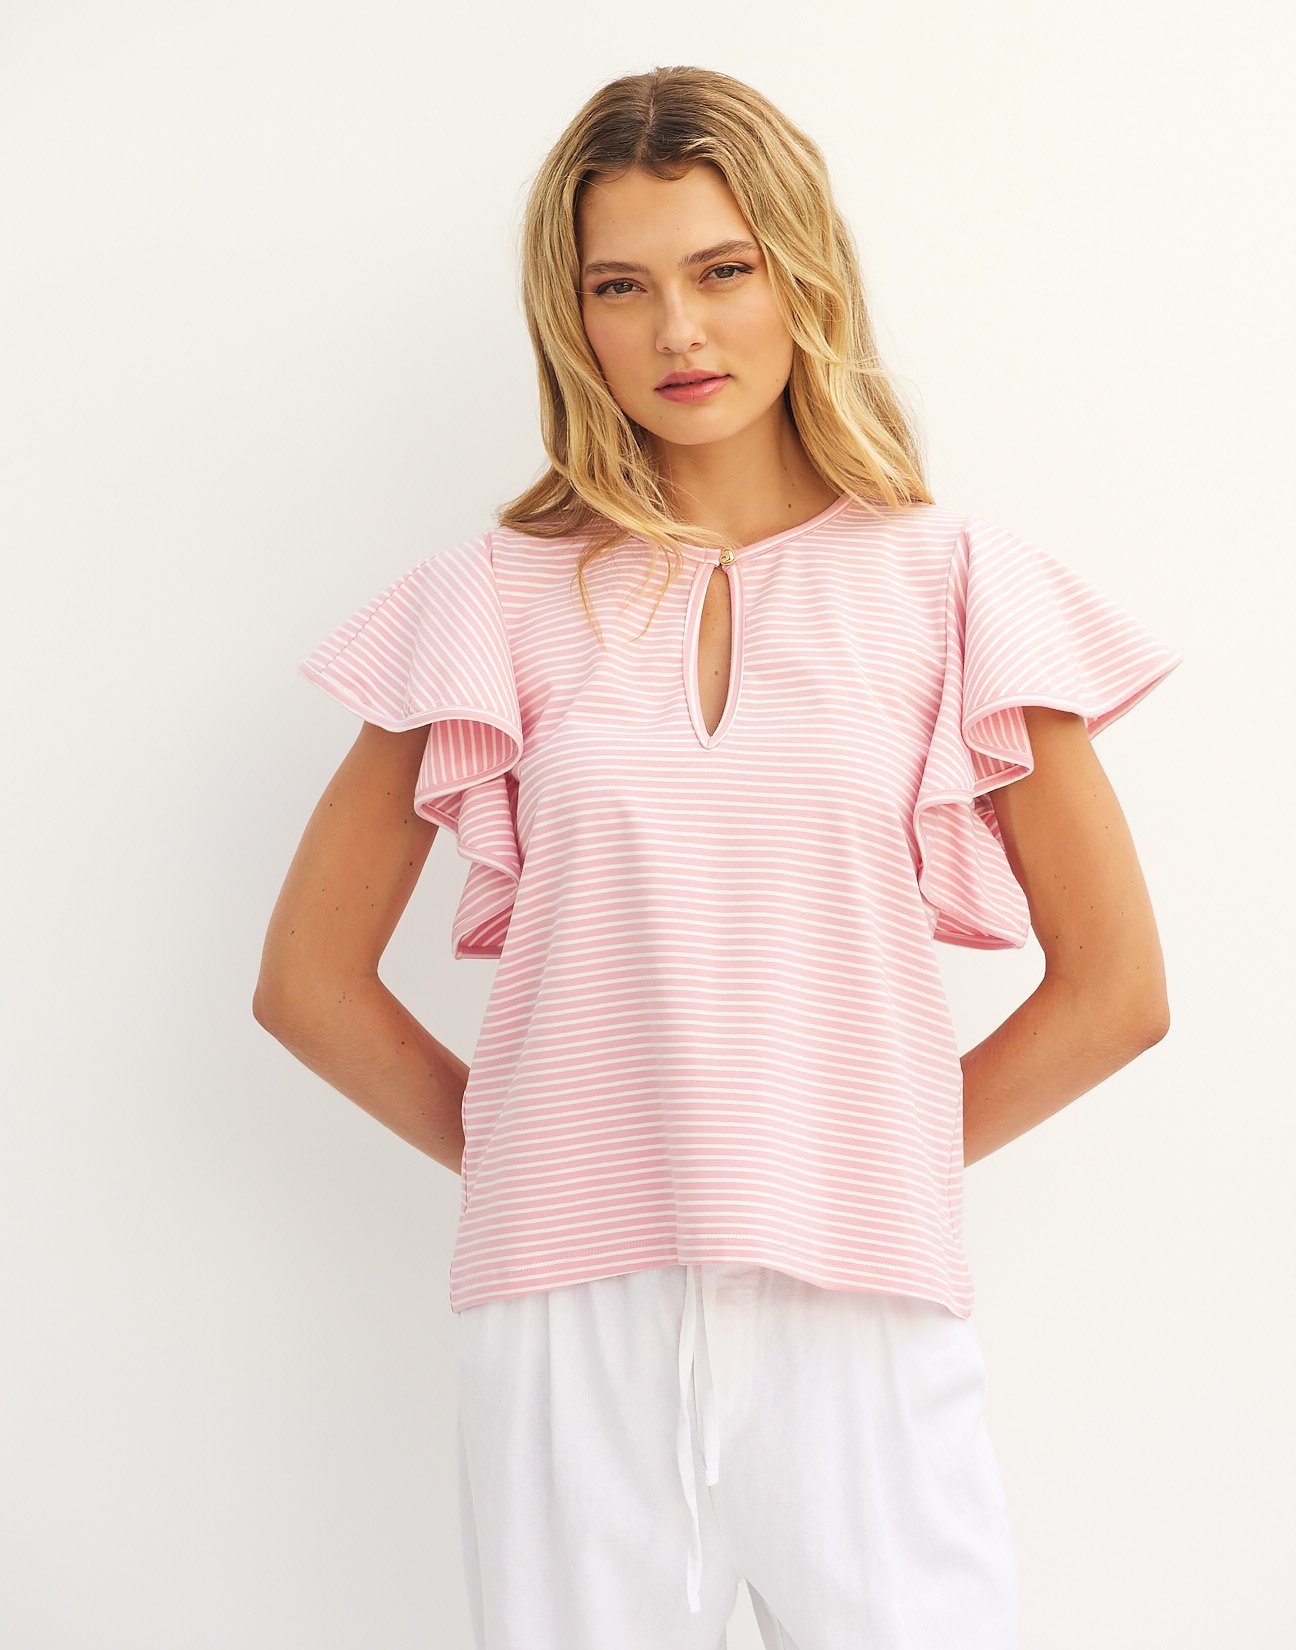 Striped top with ruffles